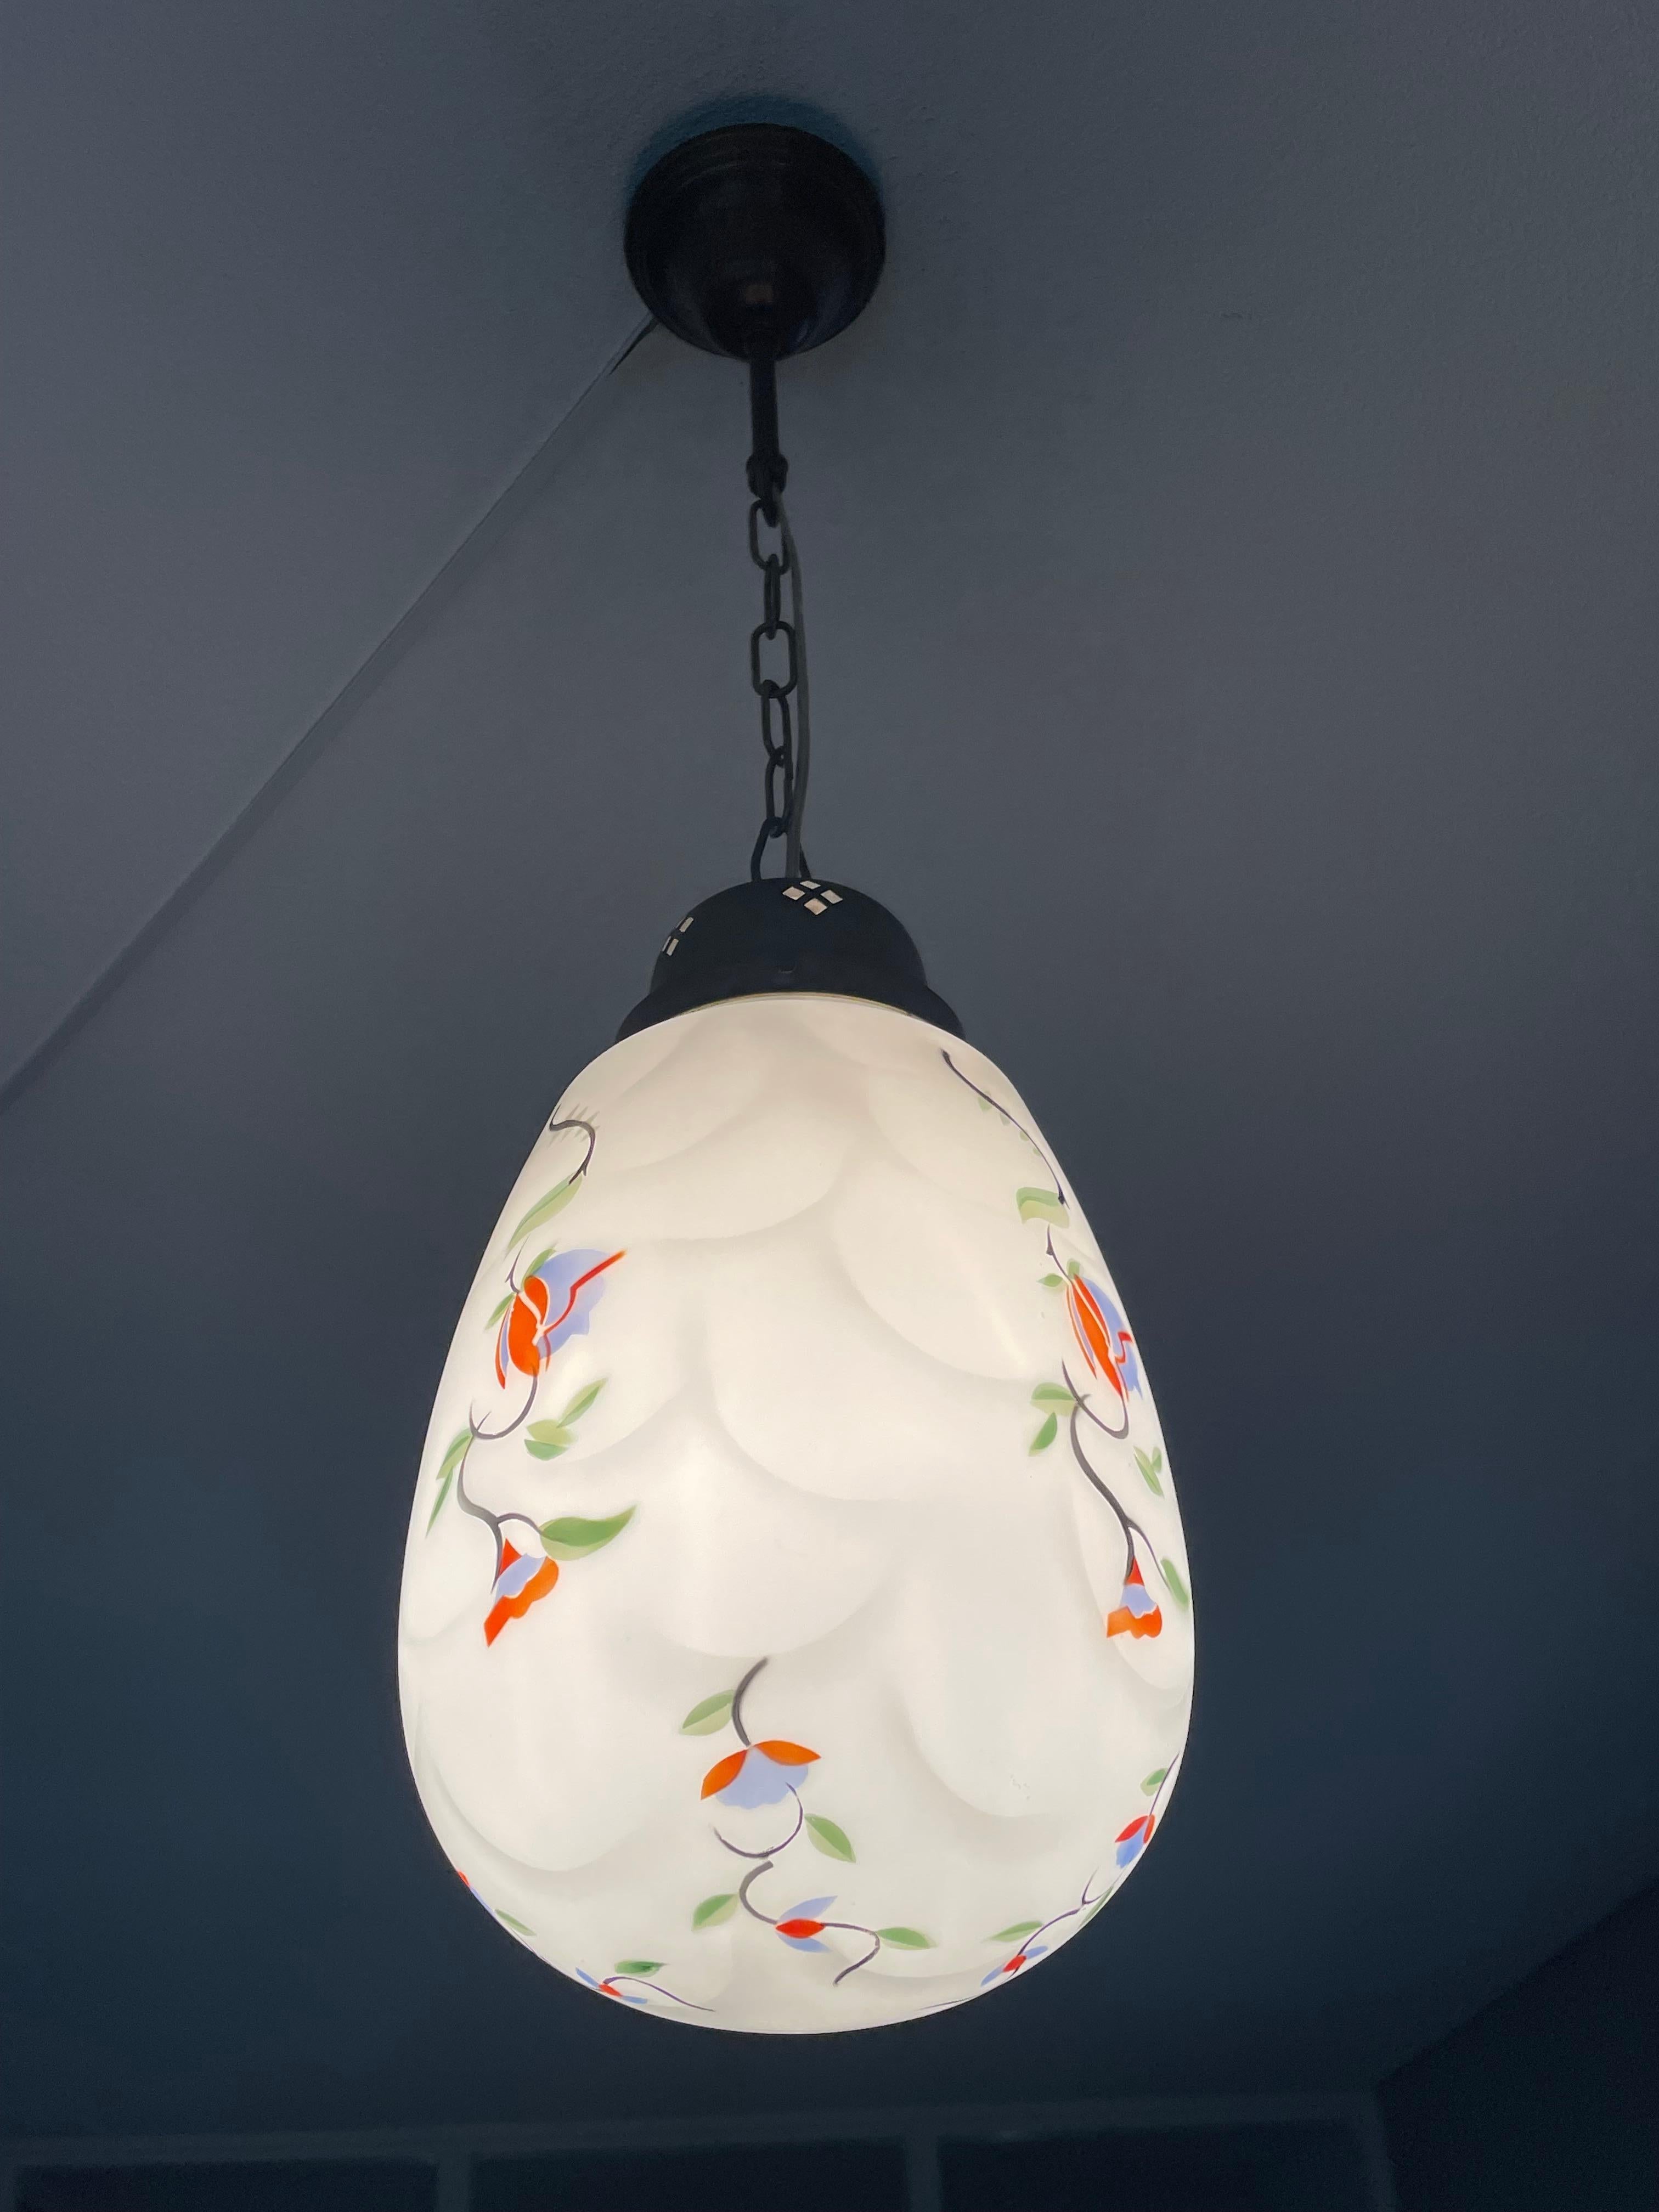 'Fresh' and colorful Art Deco ceiling lamp for your kitchen, stairwell, hallway or bedroom.

This all handcrafted, practical size and beautiful looking ceiling lamp is another one of our recent great finds. The beautiful overal design is what